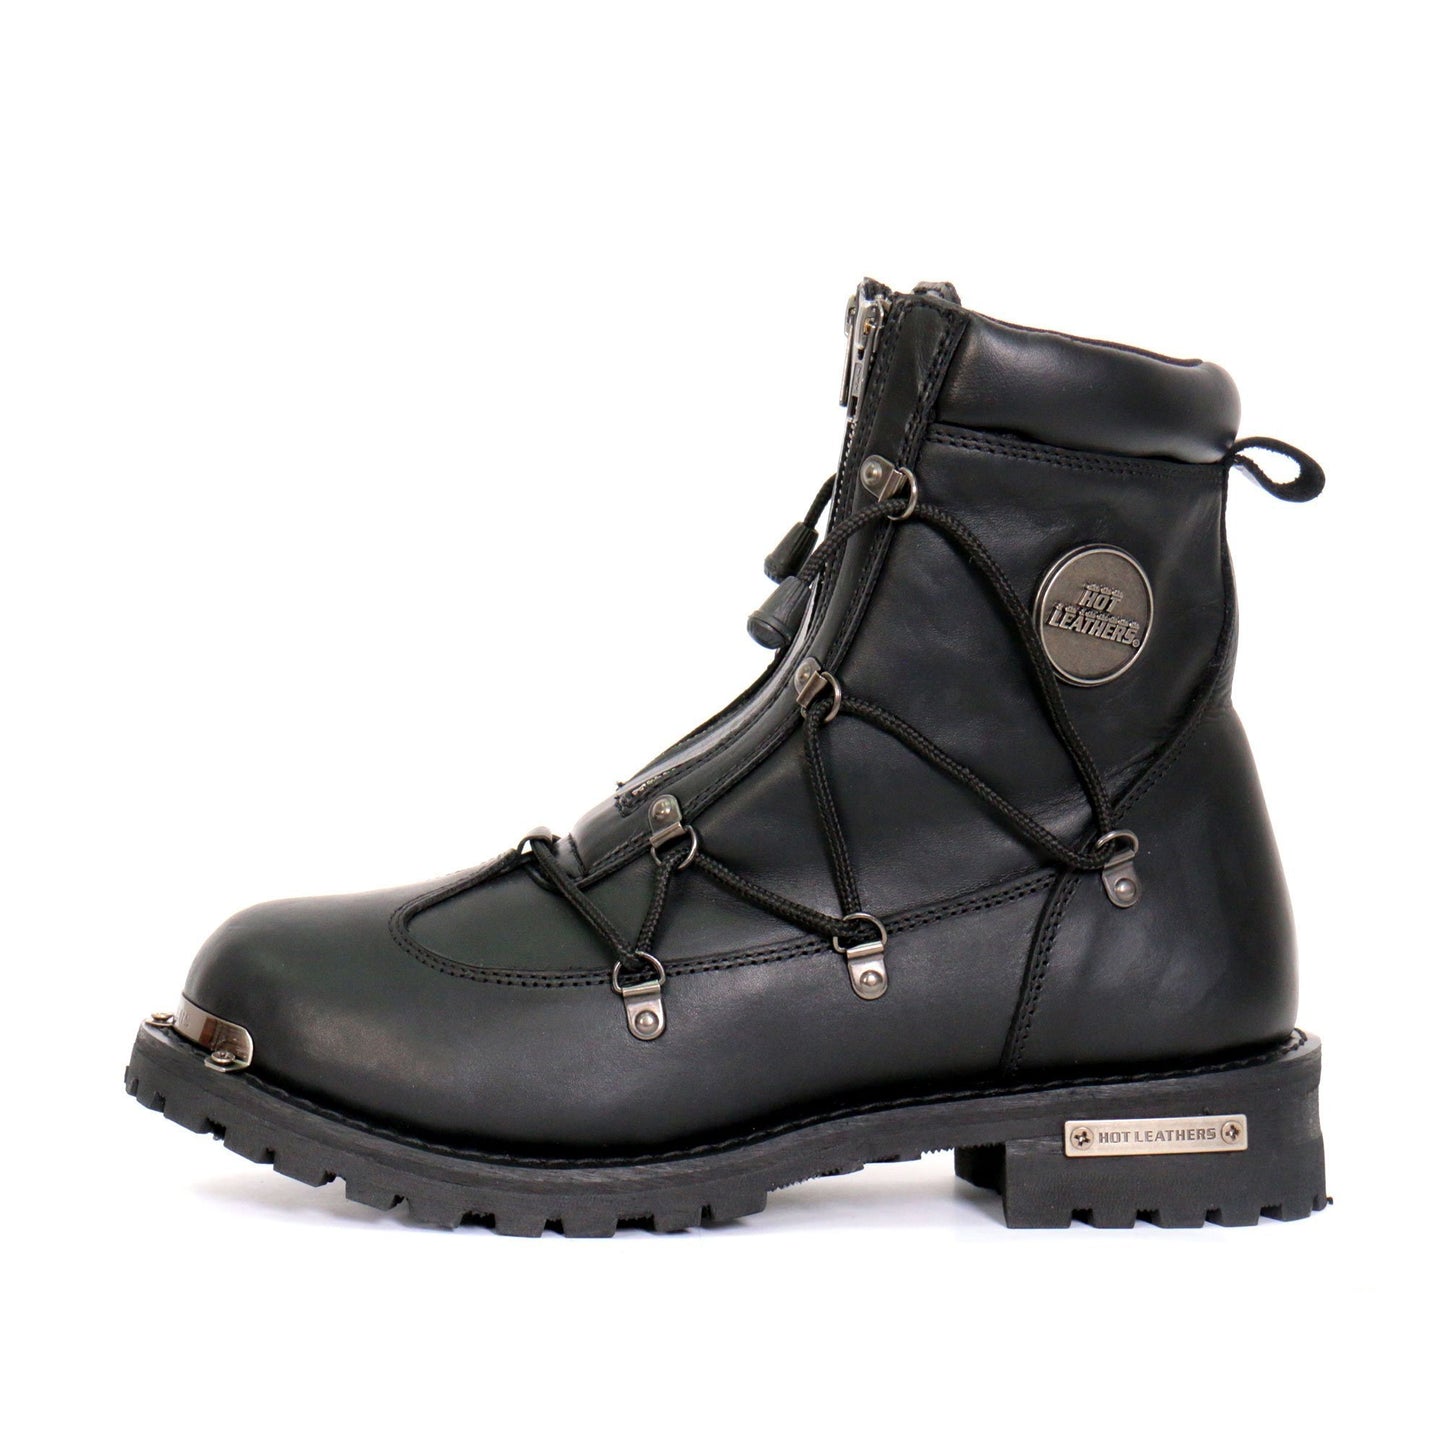 Hot Leathers BTM1009 Men's Wide Width Black 7-Inch Leather Lace Up Boots with Zipper Closure